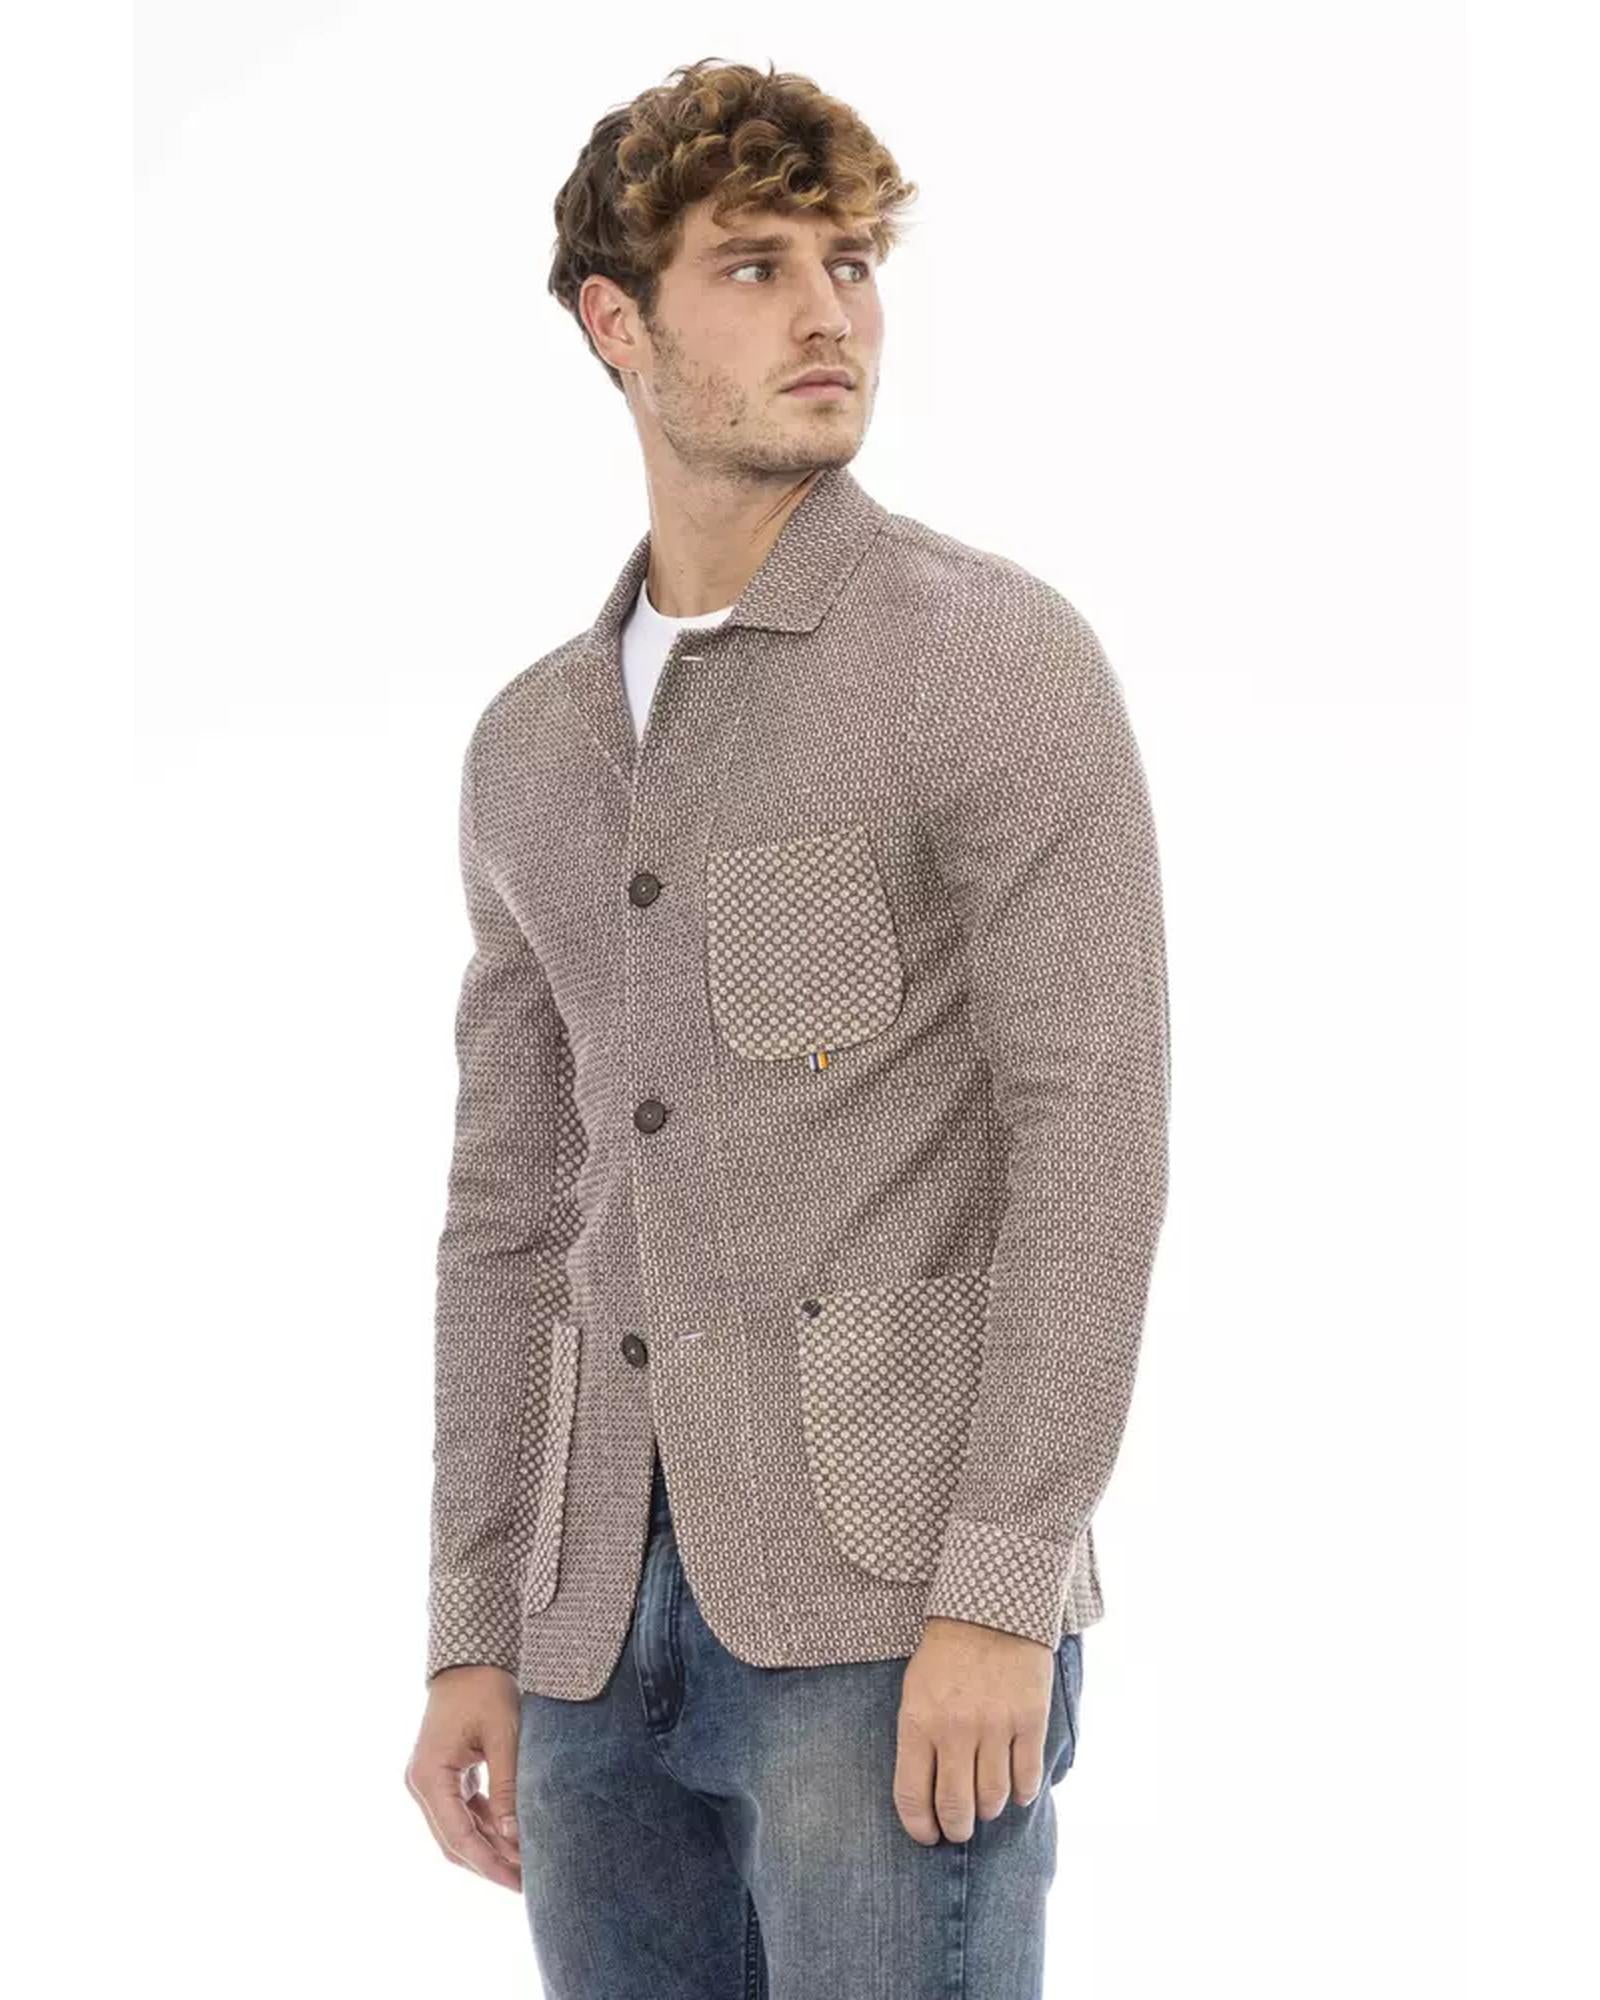 Classic Button-Front Fabric Jacket with Front Pockets 48 IT Men